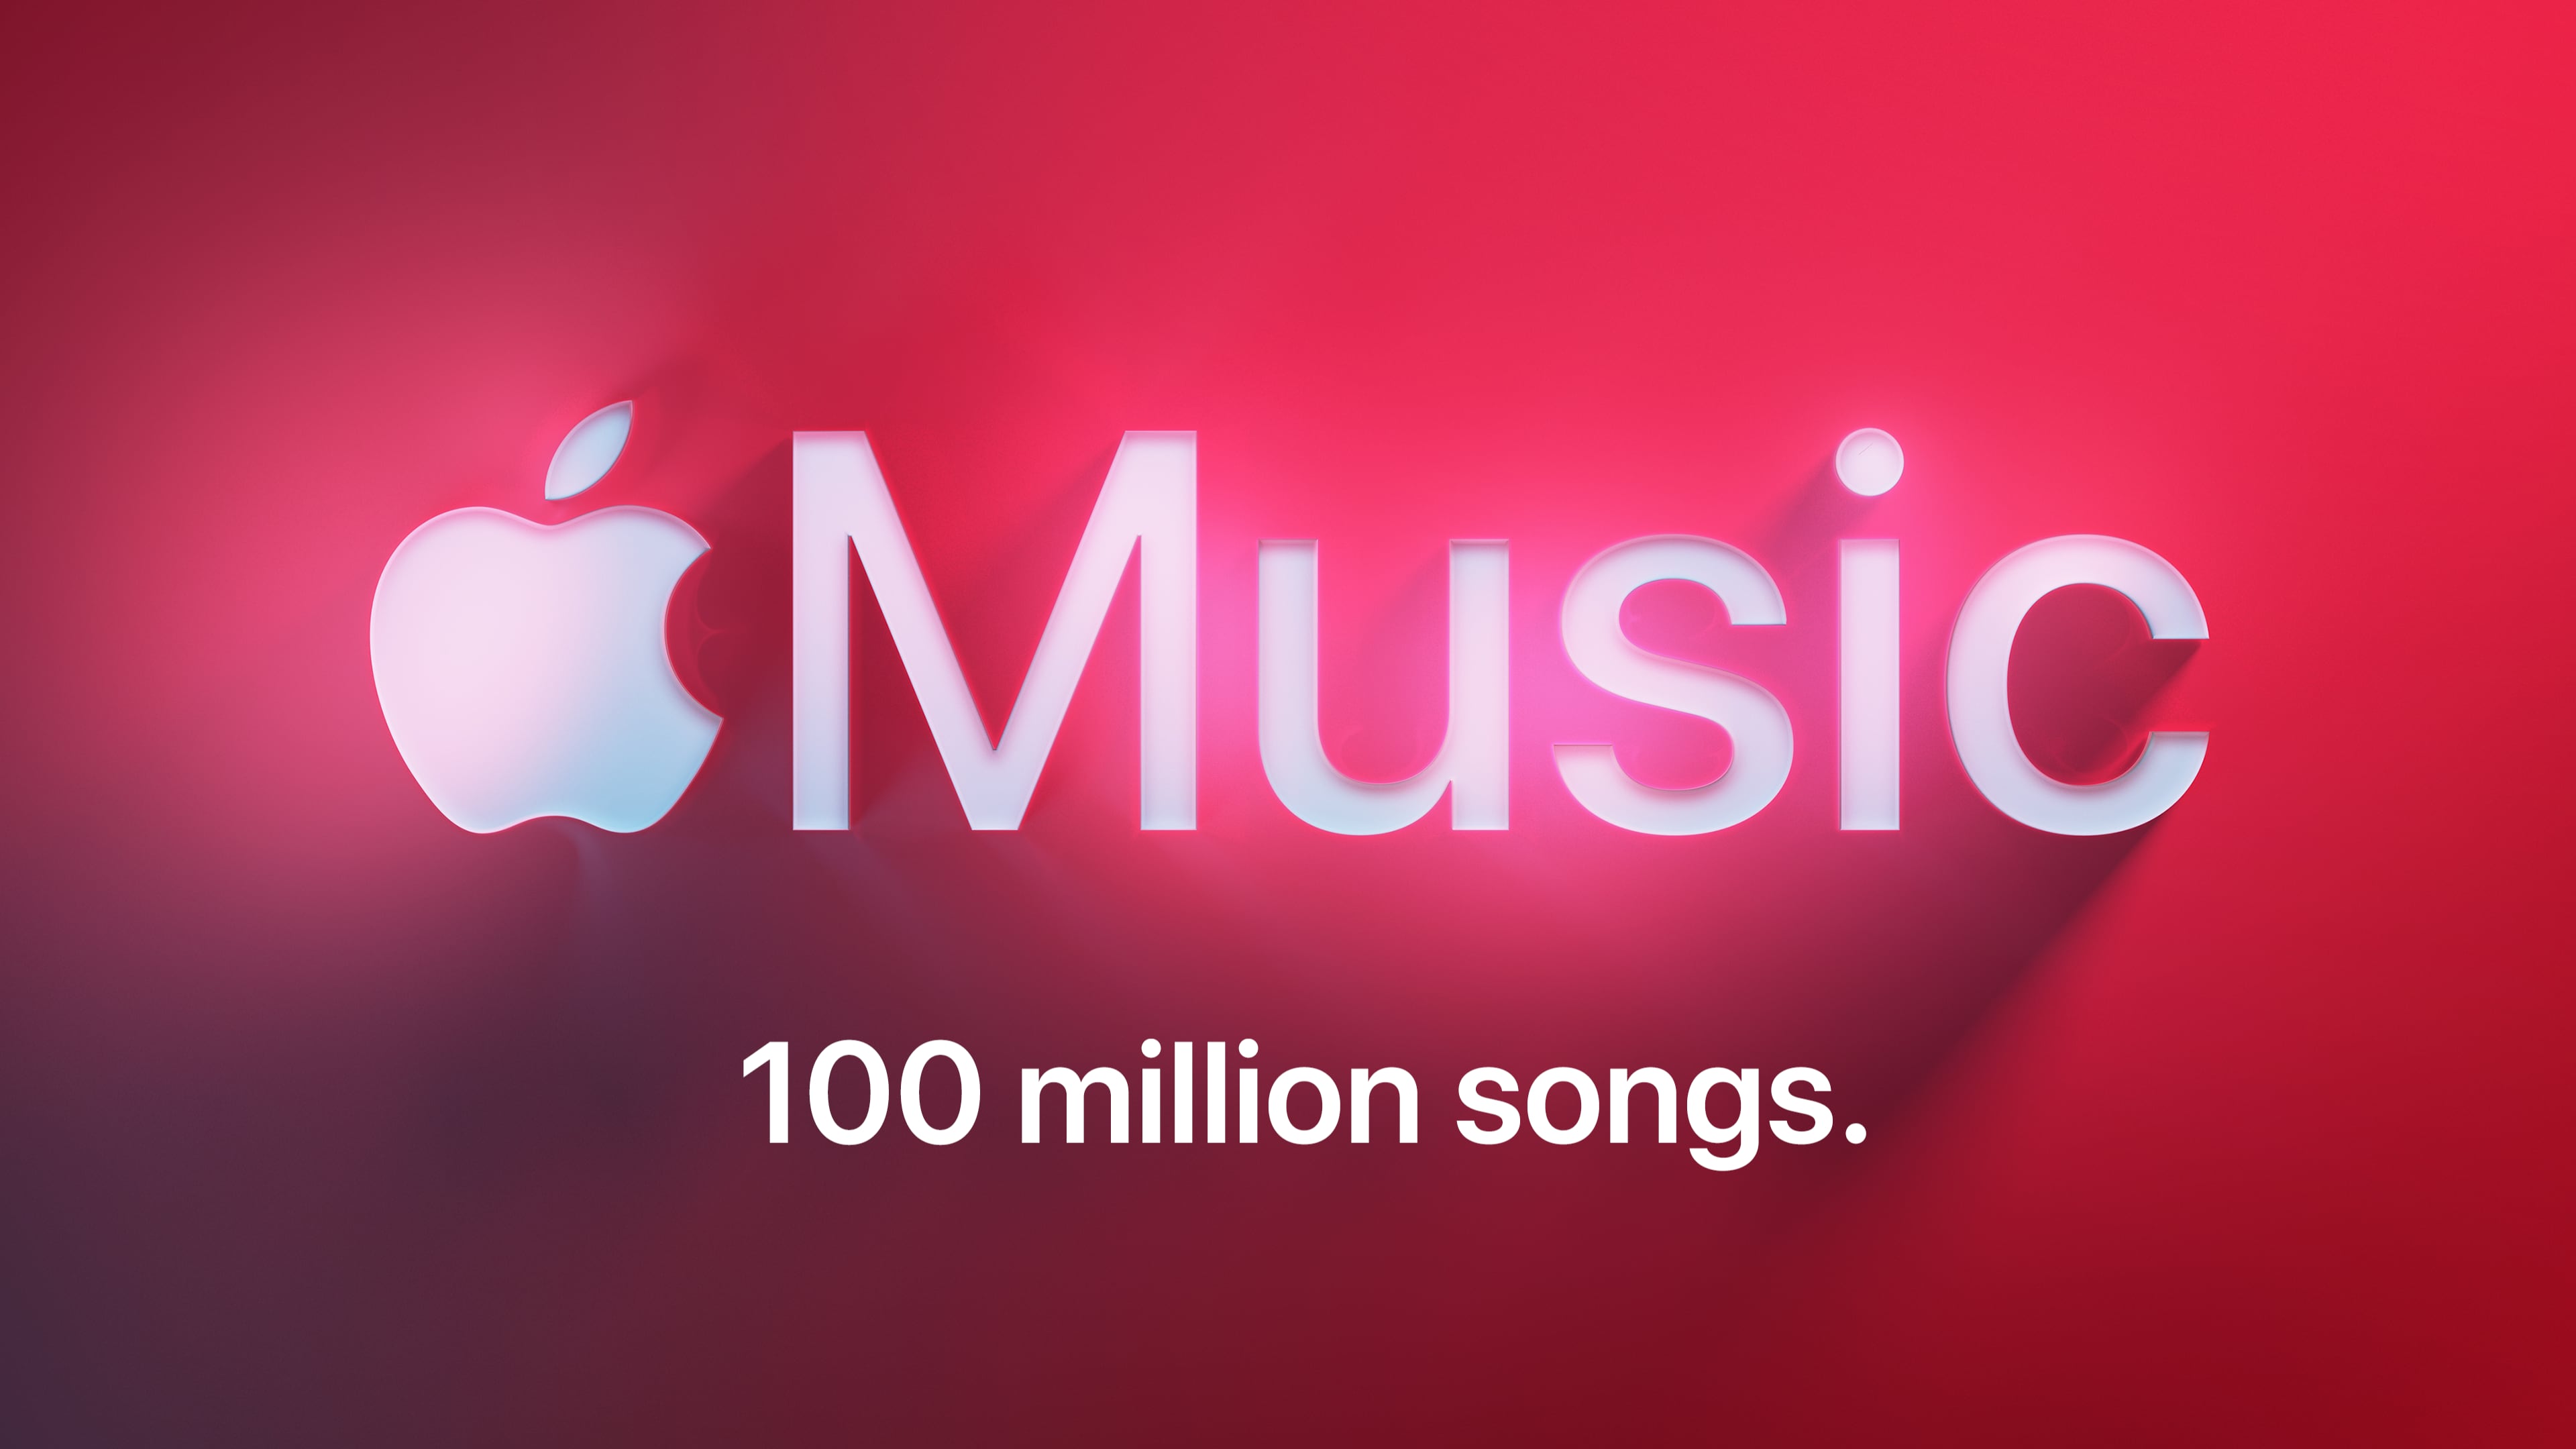 Apple Music logo along with the "100 million songs" tagline in white font, casting shadow on a red gradient background 